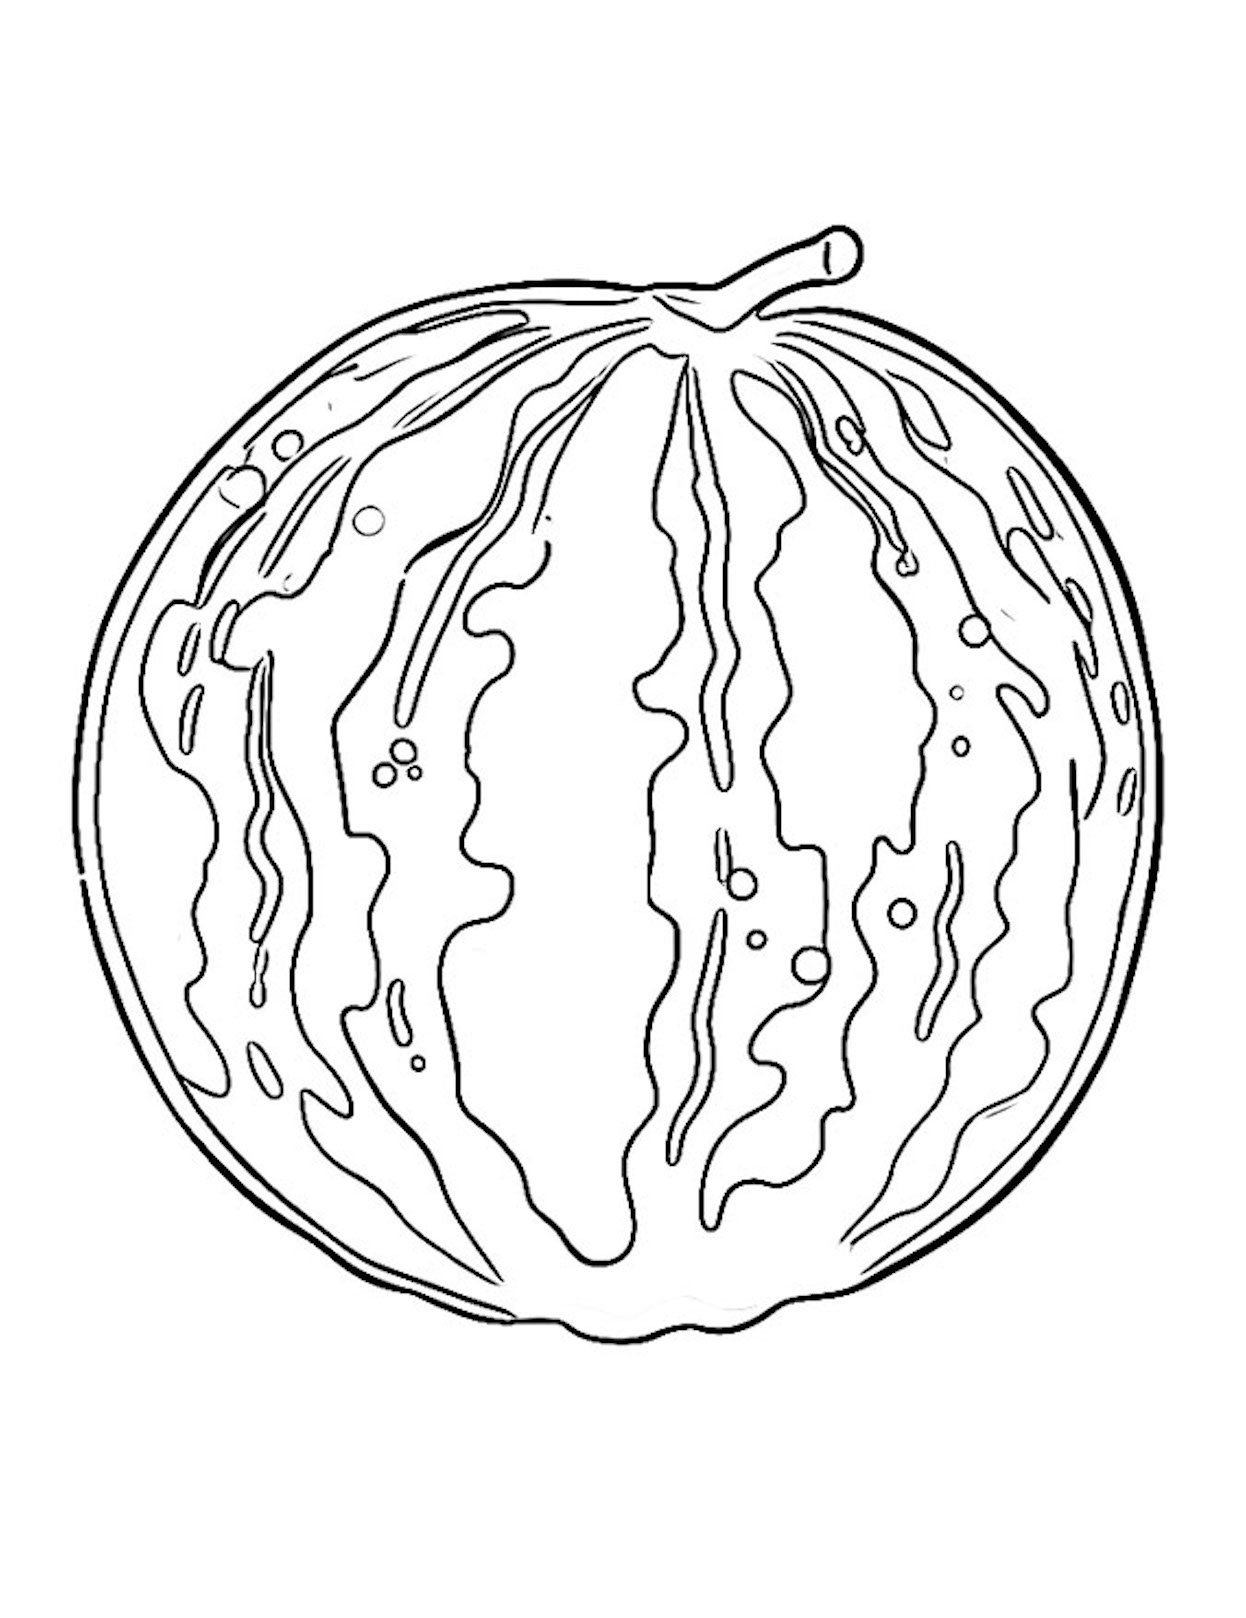 Incredible watermelon coloring pages